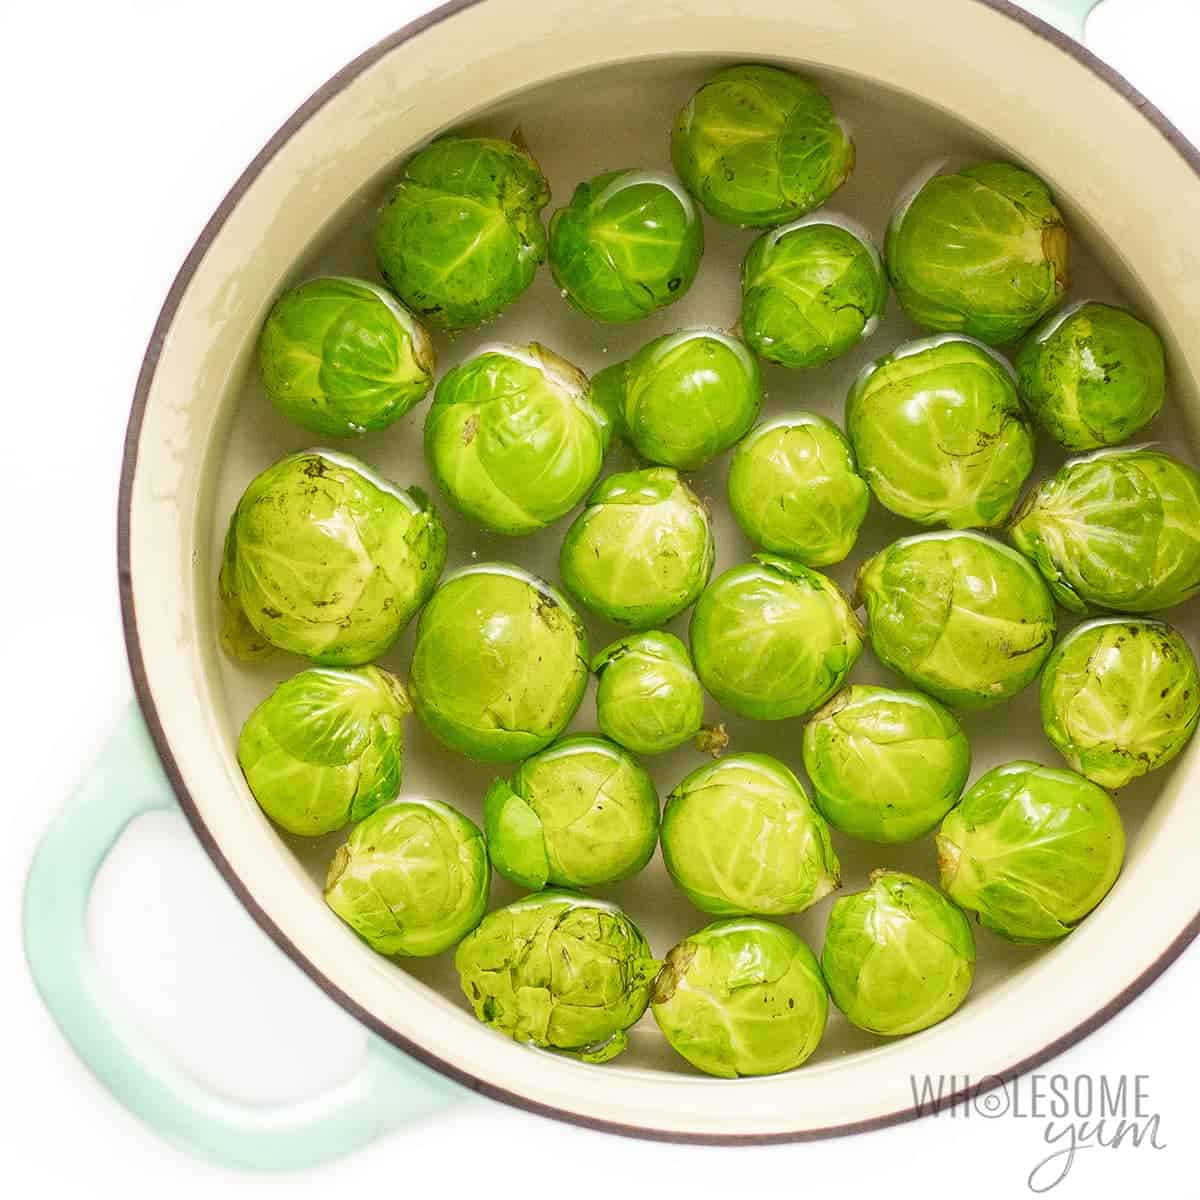 Boiled brussels sprouts in Dutch oven.